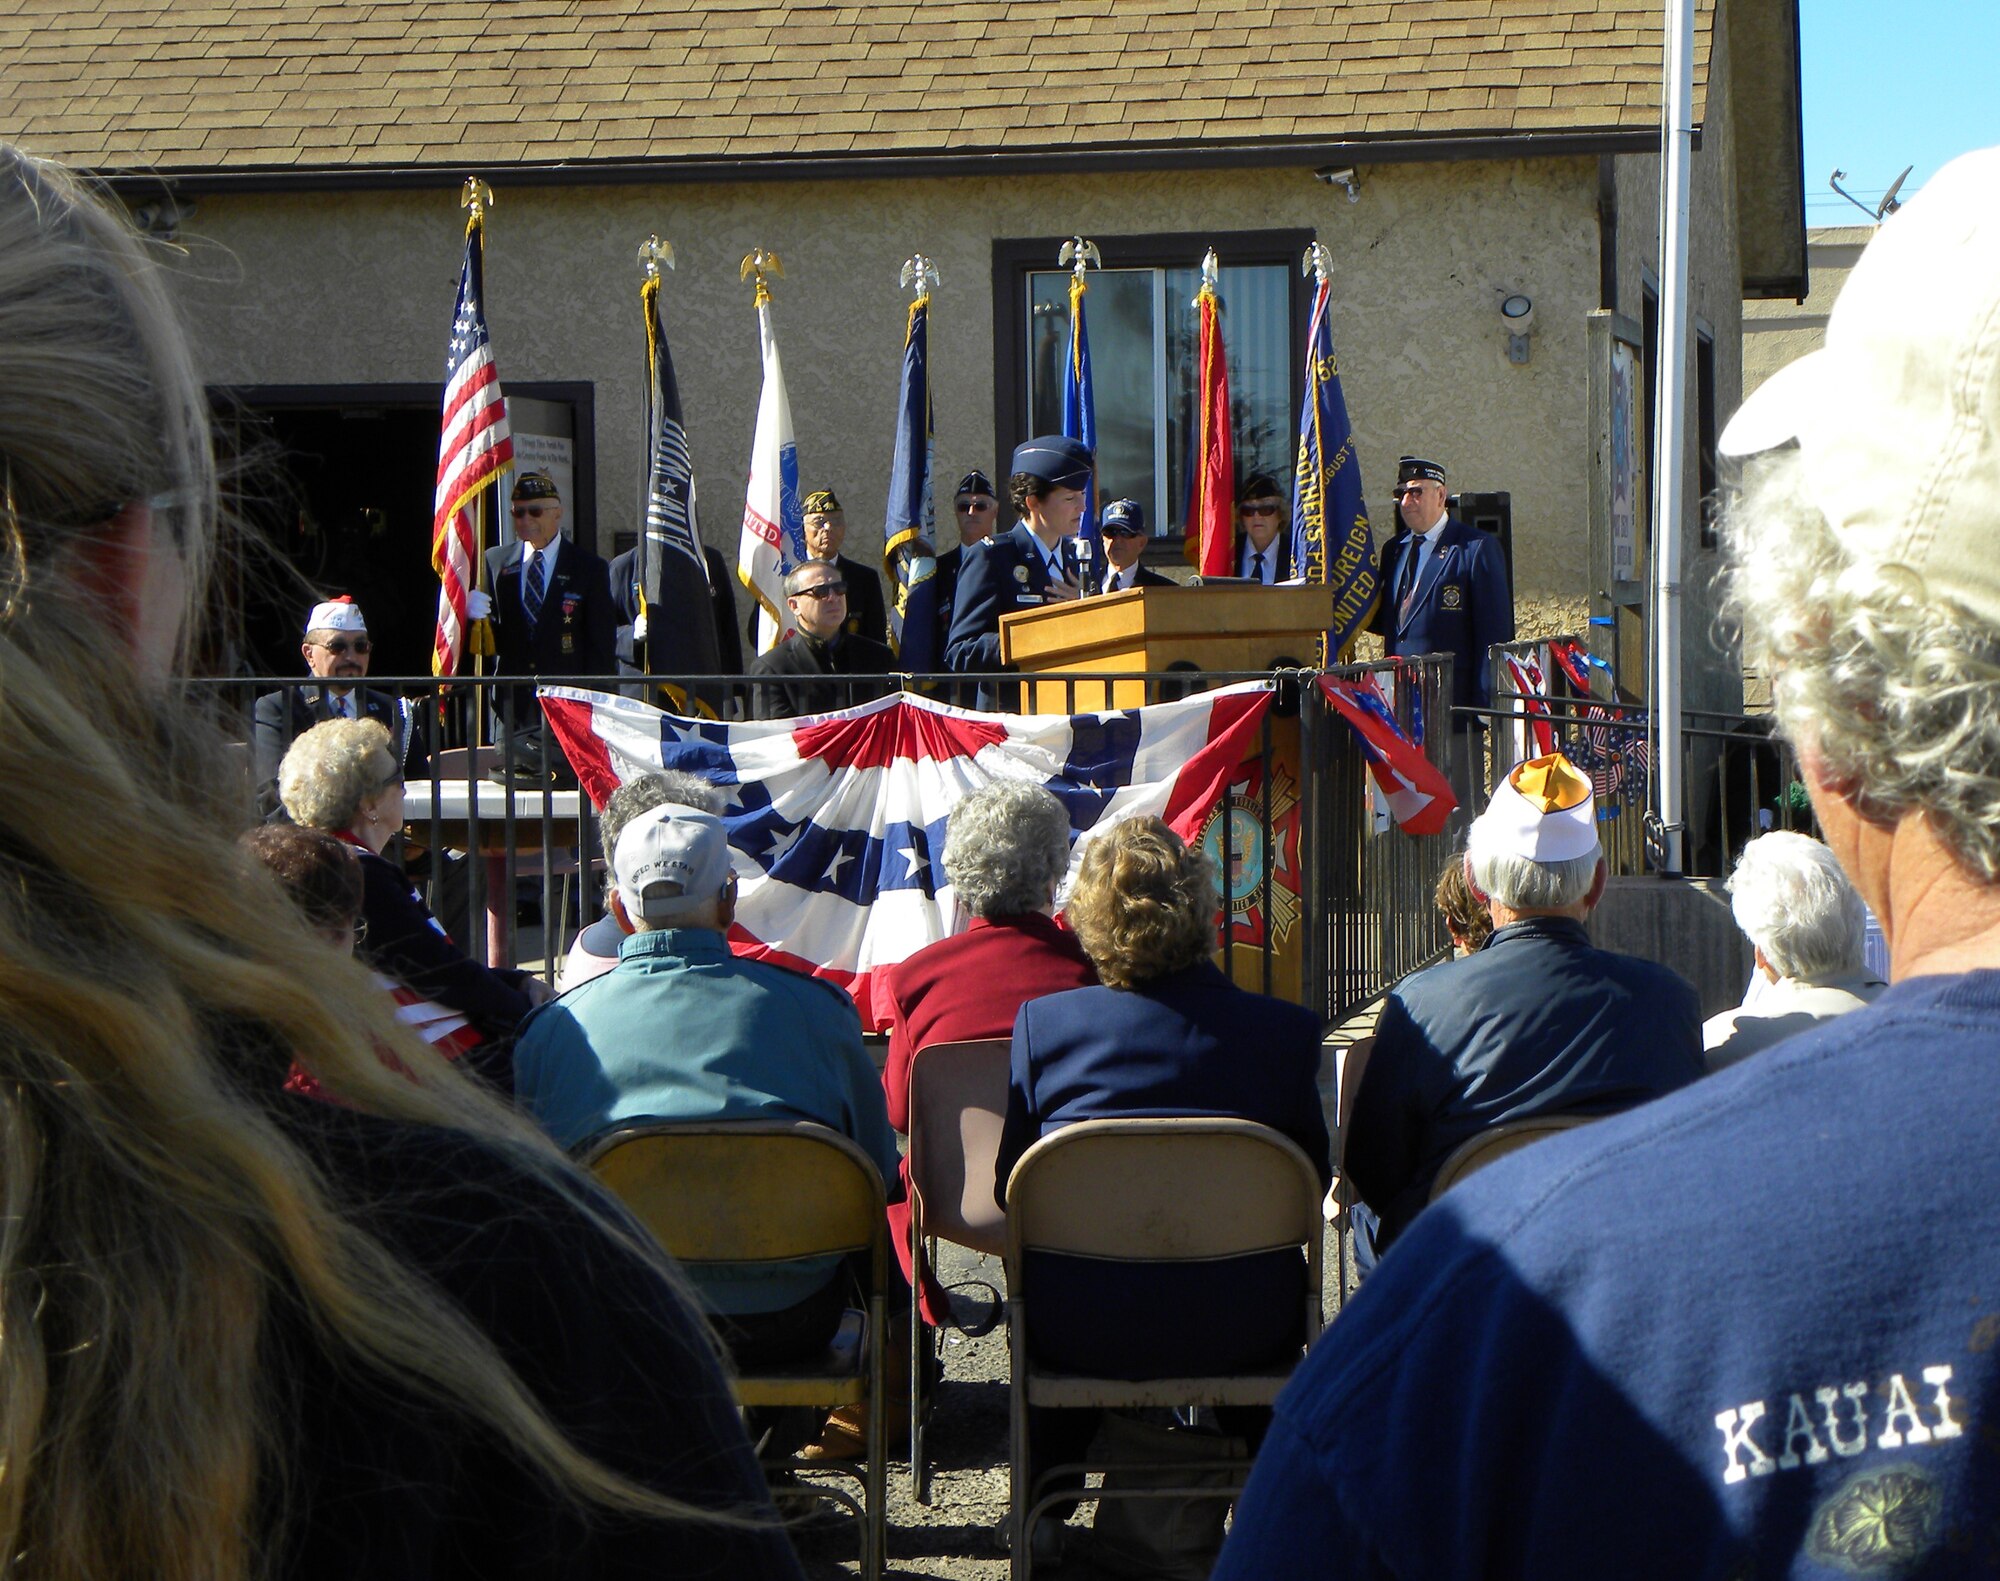 VANDENBERG AIR FORCE BASE, Calif. -- Col. Nina Armagno, 30th Space Wing commander, speaks to a group of veterans and guests during a Veteran's Day ceremony hosted by Santa Maria Veterans of Foreign Wars Post 2521 on Sunday, Nov. 11, 2012. Vandenberg senior leaders partnered with local veterans groups and community leaders to speak at Veteran's Day events and offer their gratitude on behalf of active duty military to all veterans who have served their country. (U.S. Air Force photo/Kathi Peoples)